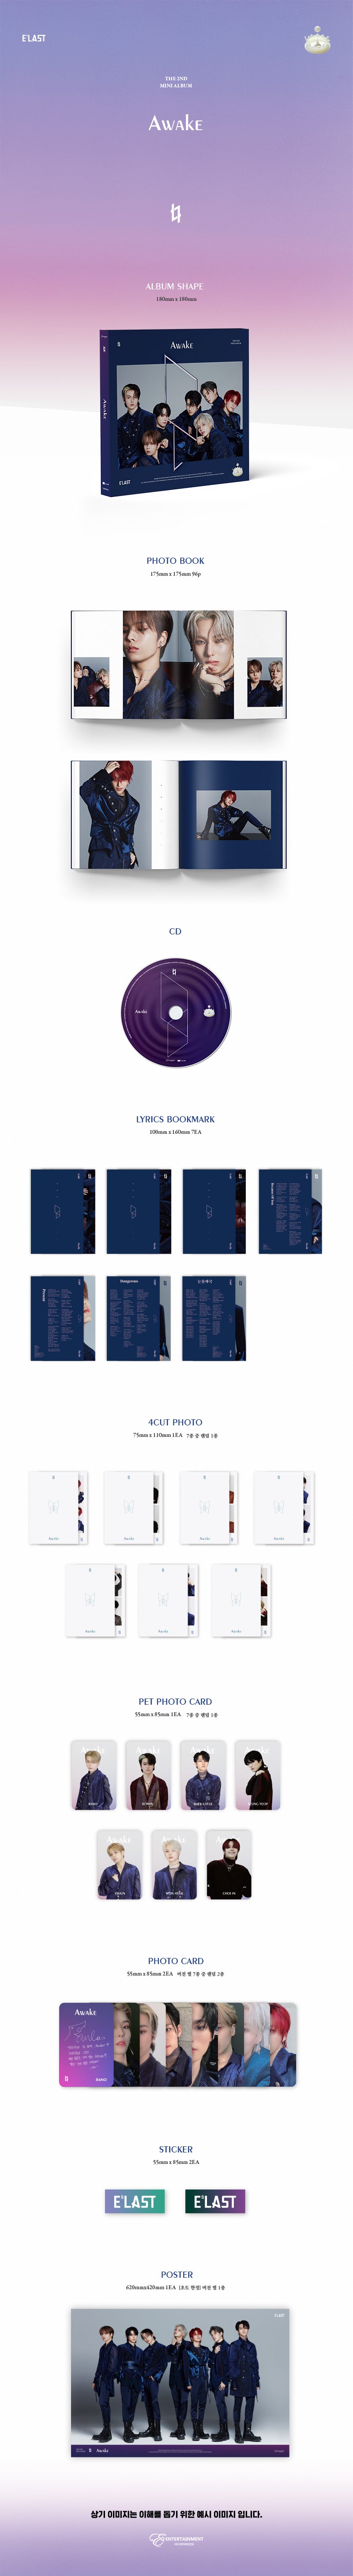 1 CD
1 Photo Book (96 pages)
7 Lyrics Bookmarks
1 4-cut Photo
1 Pet Photo Card
2 Photo Cards
2 Stickers